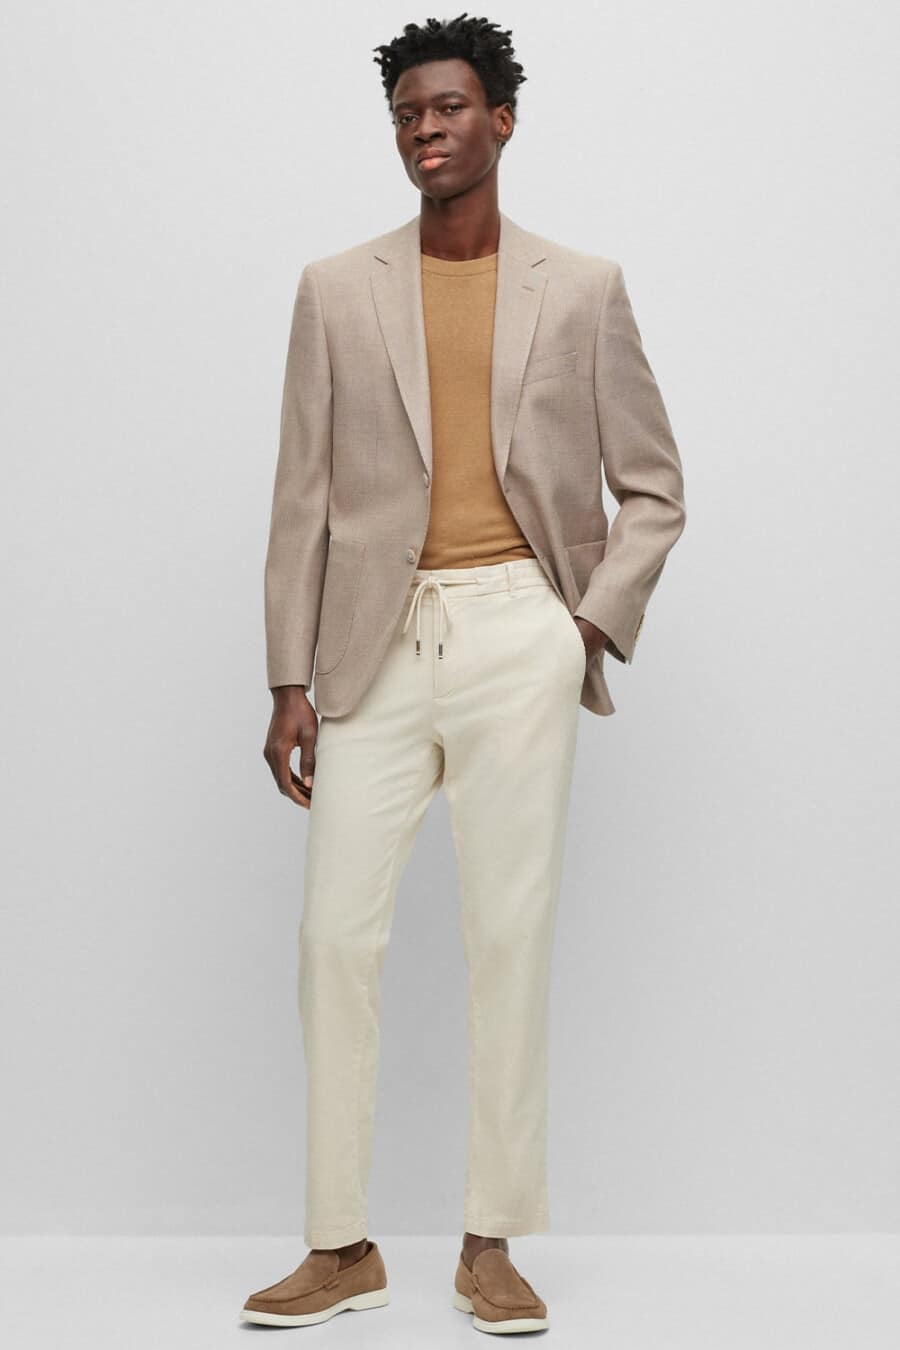 Men's stone drawstring pants, tan T-shirt, light brown blazer and brown suede loafers outfit